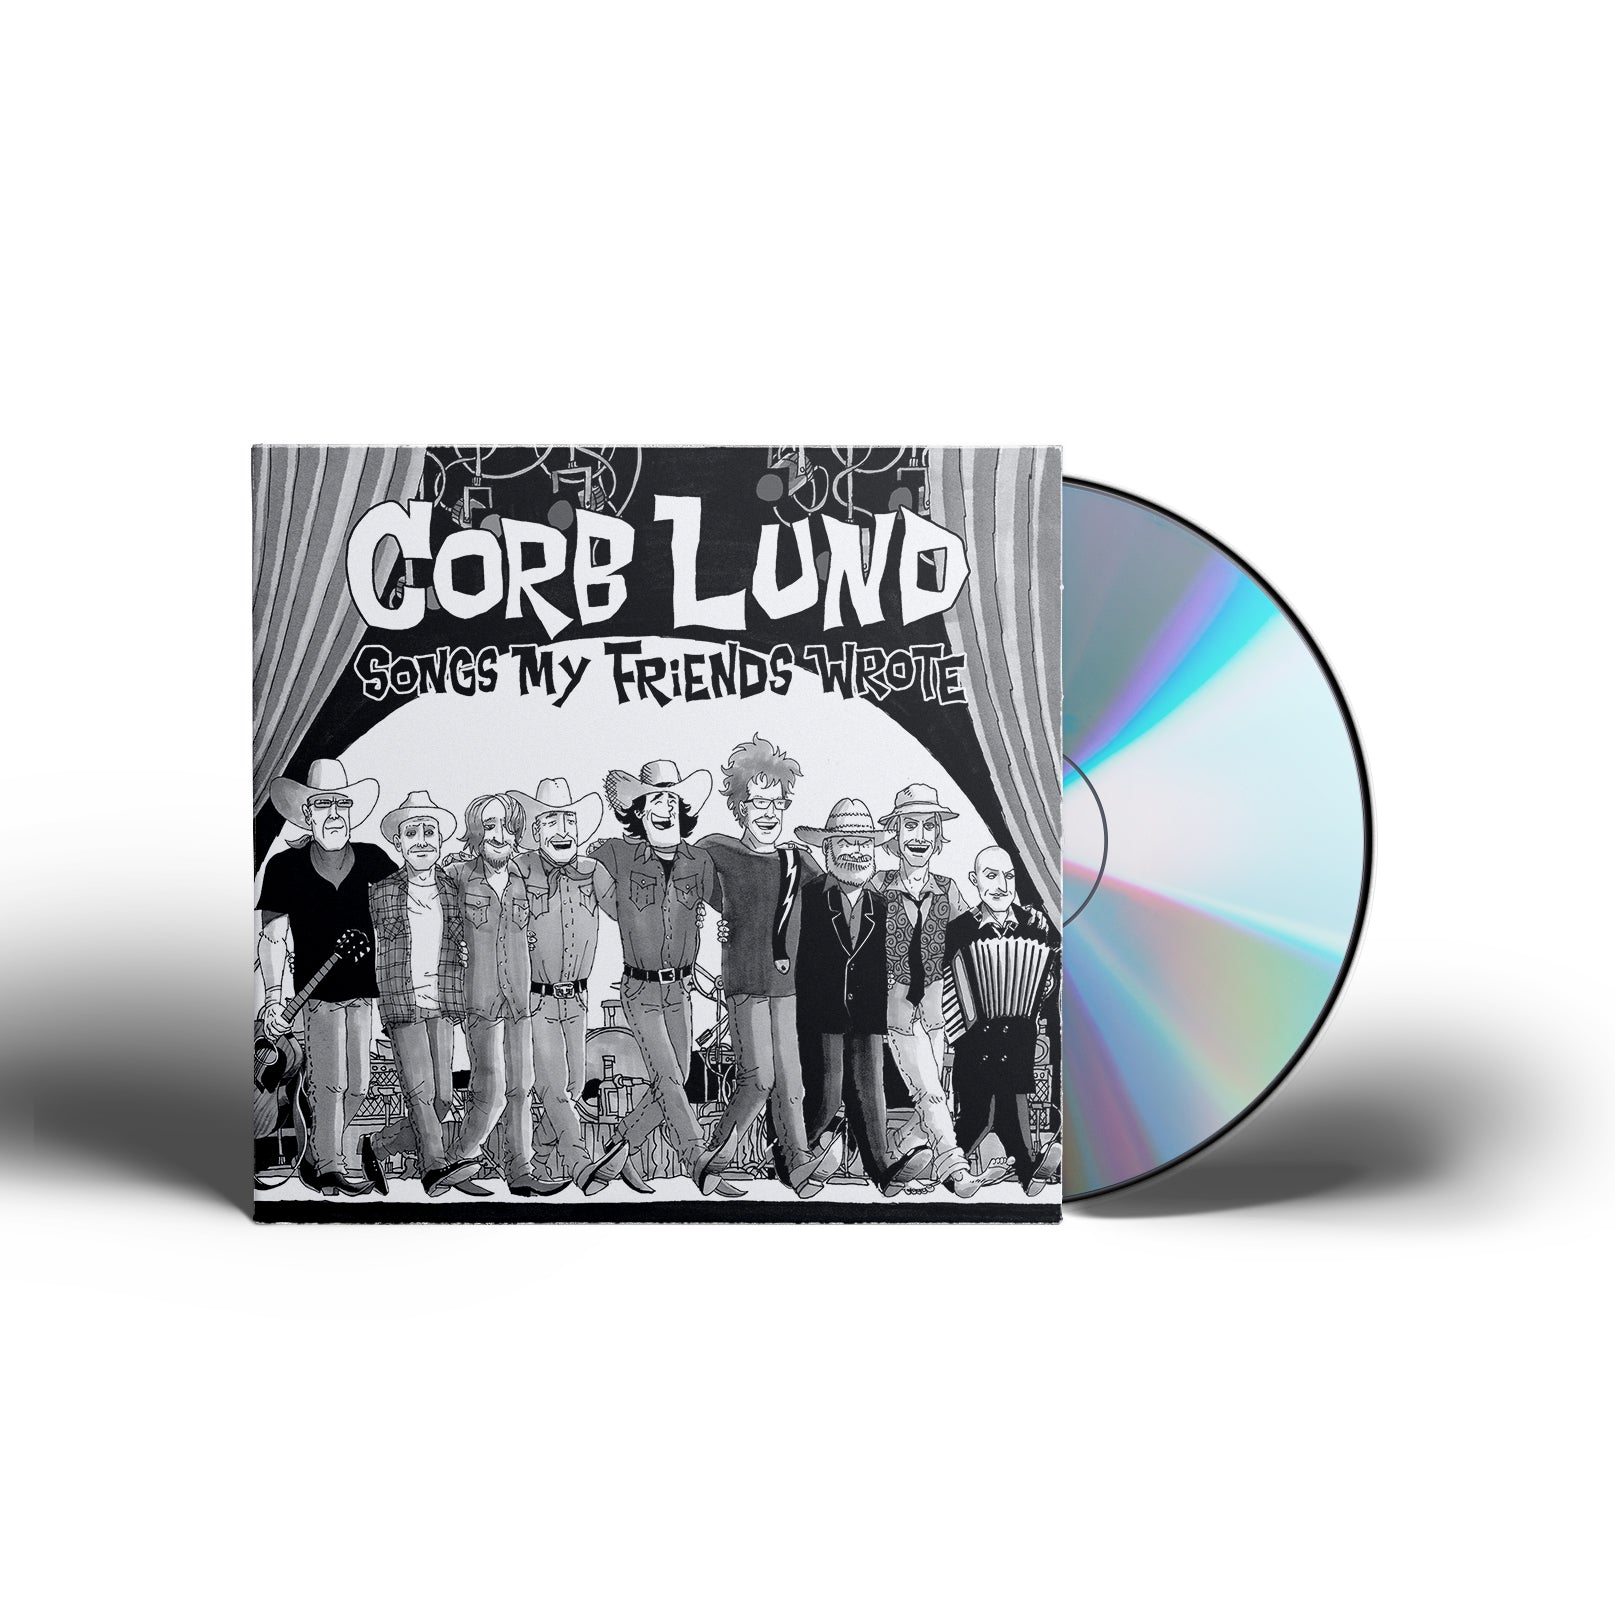 Corb Lund - Songs My Friends Wrote [CD]